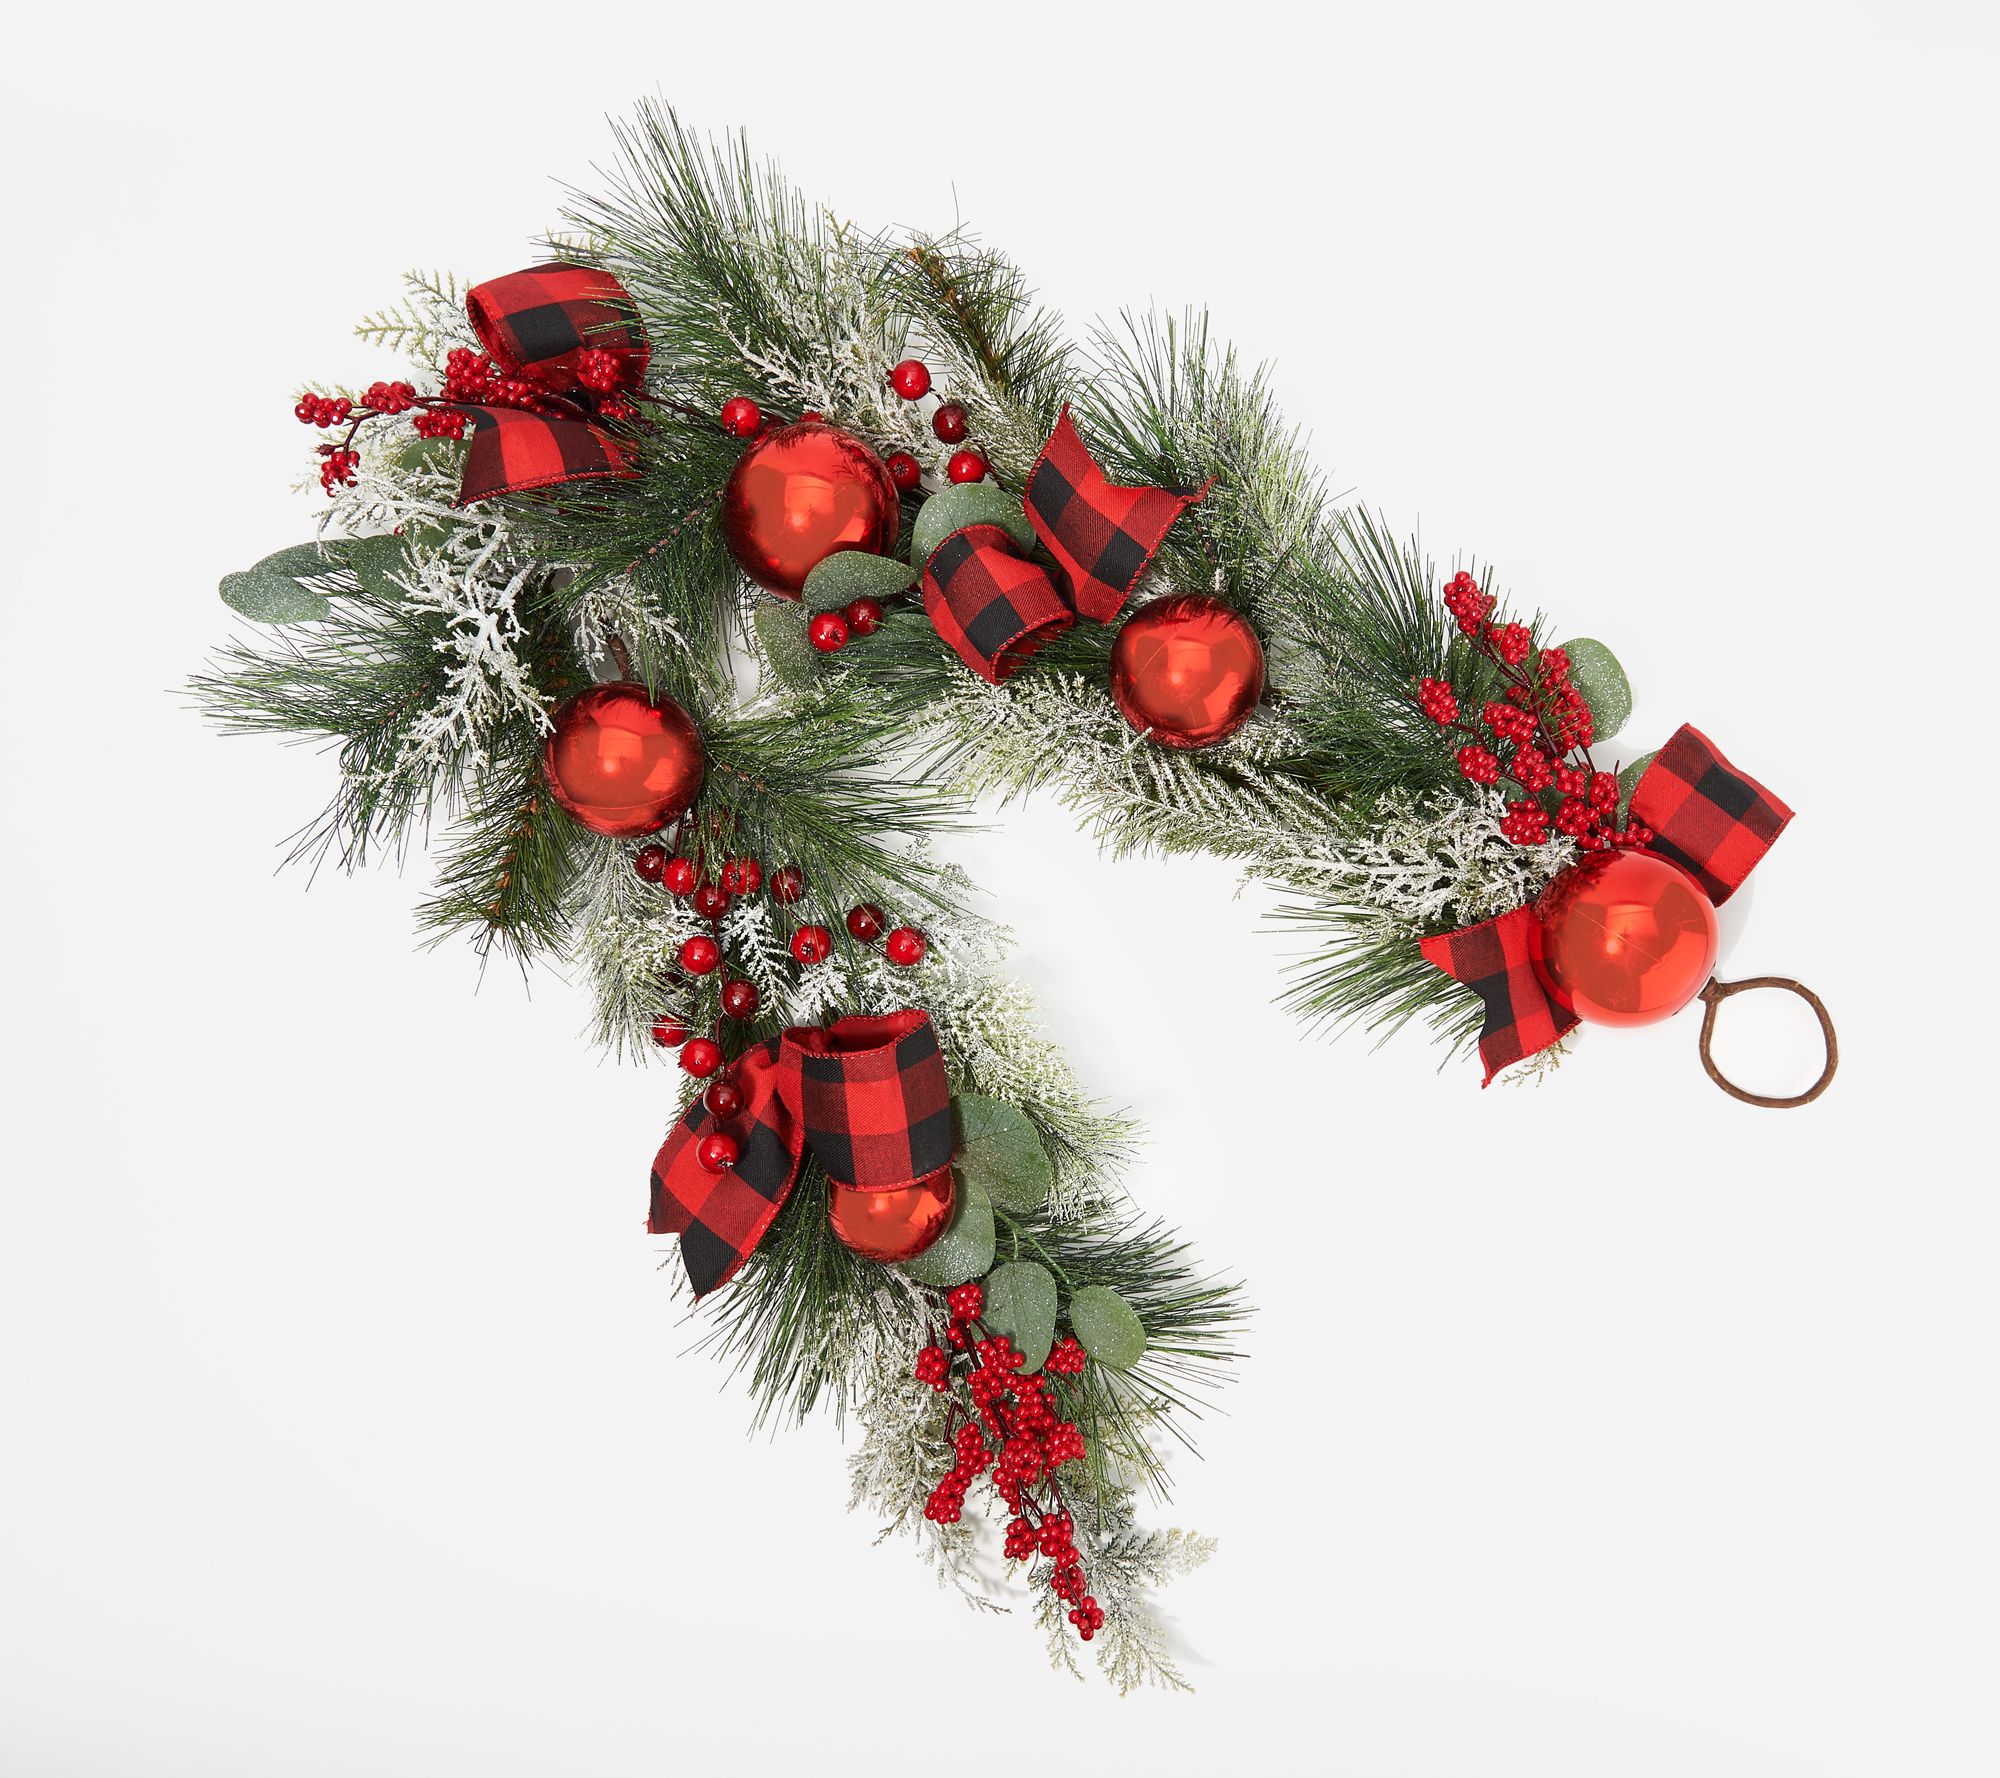 4' Cedar & Pine Garland with Ornaments and Ribbon by Valerie - QVC.com